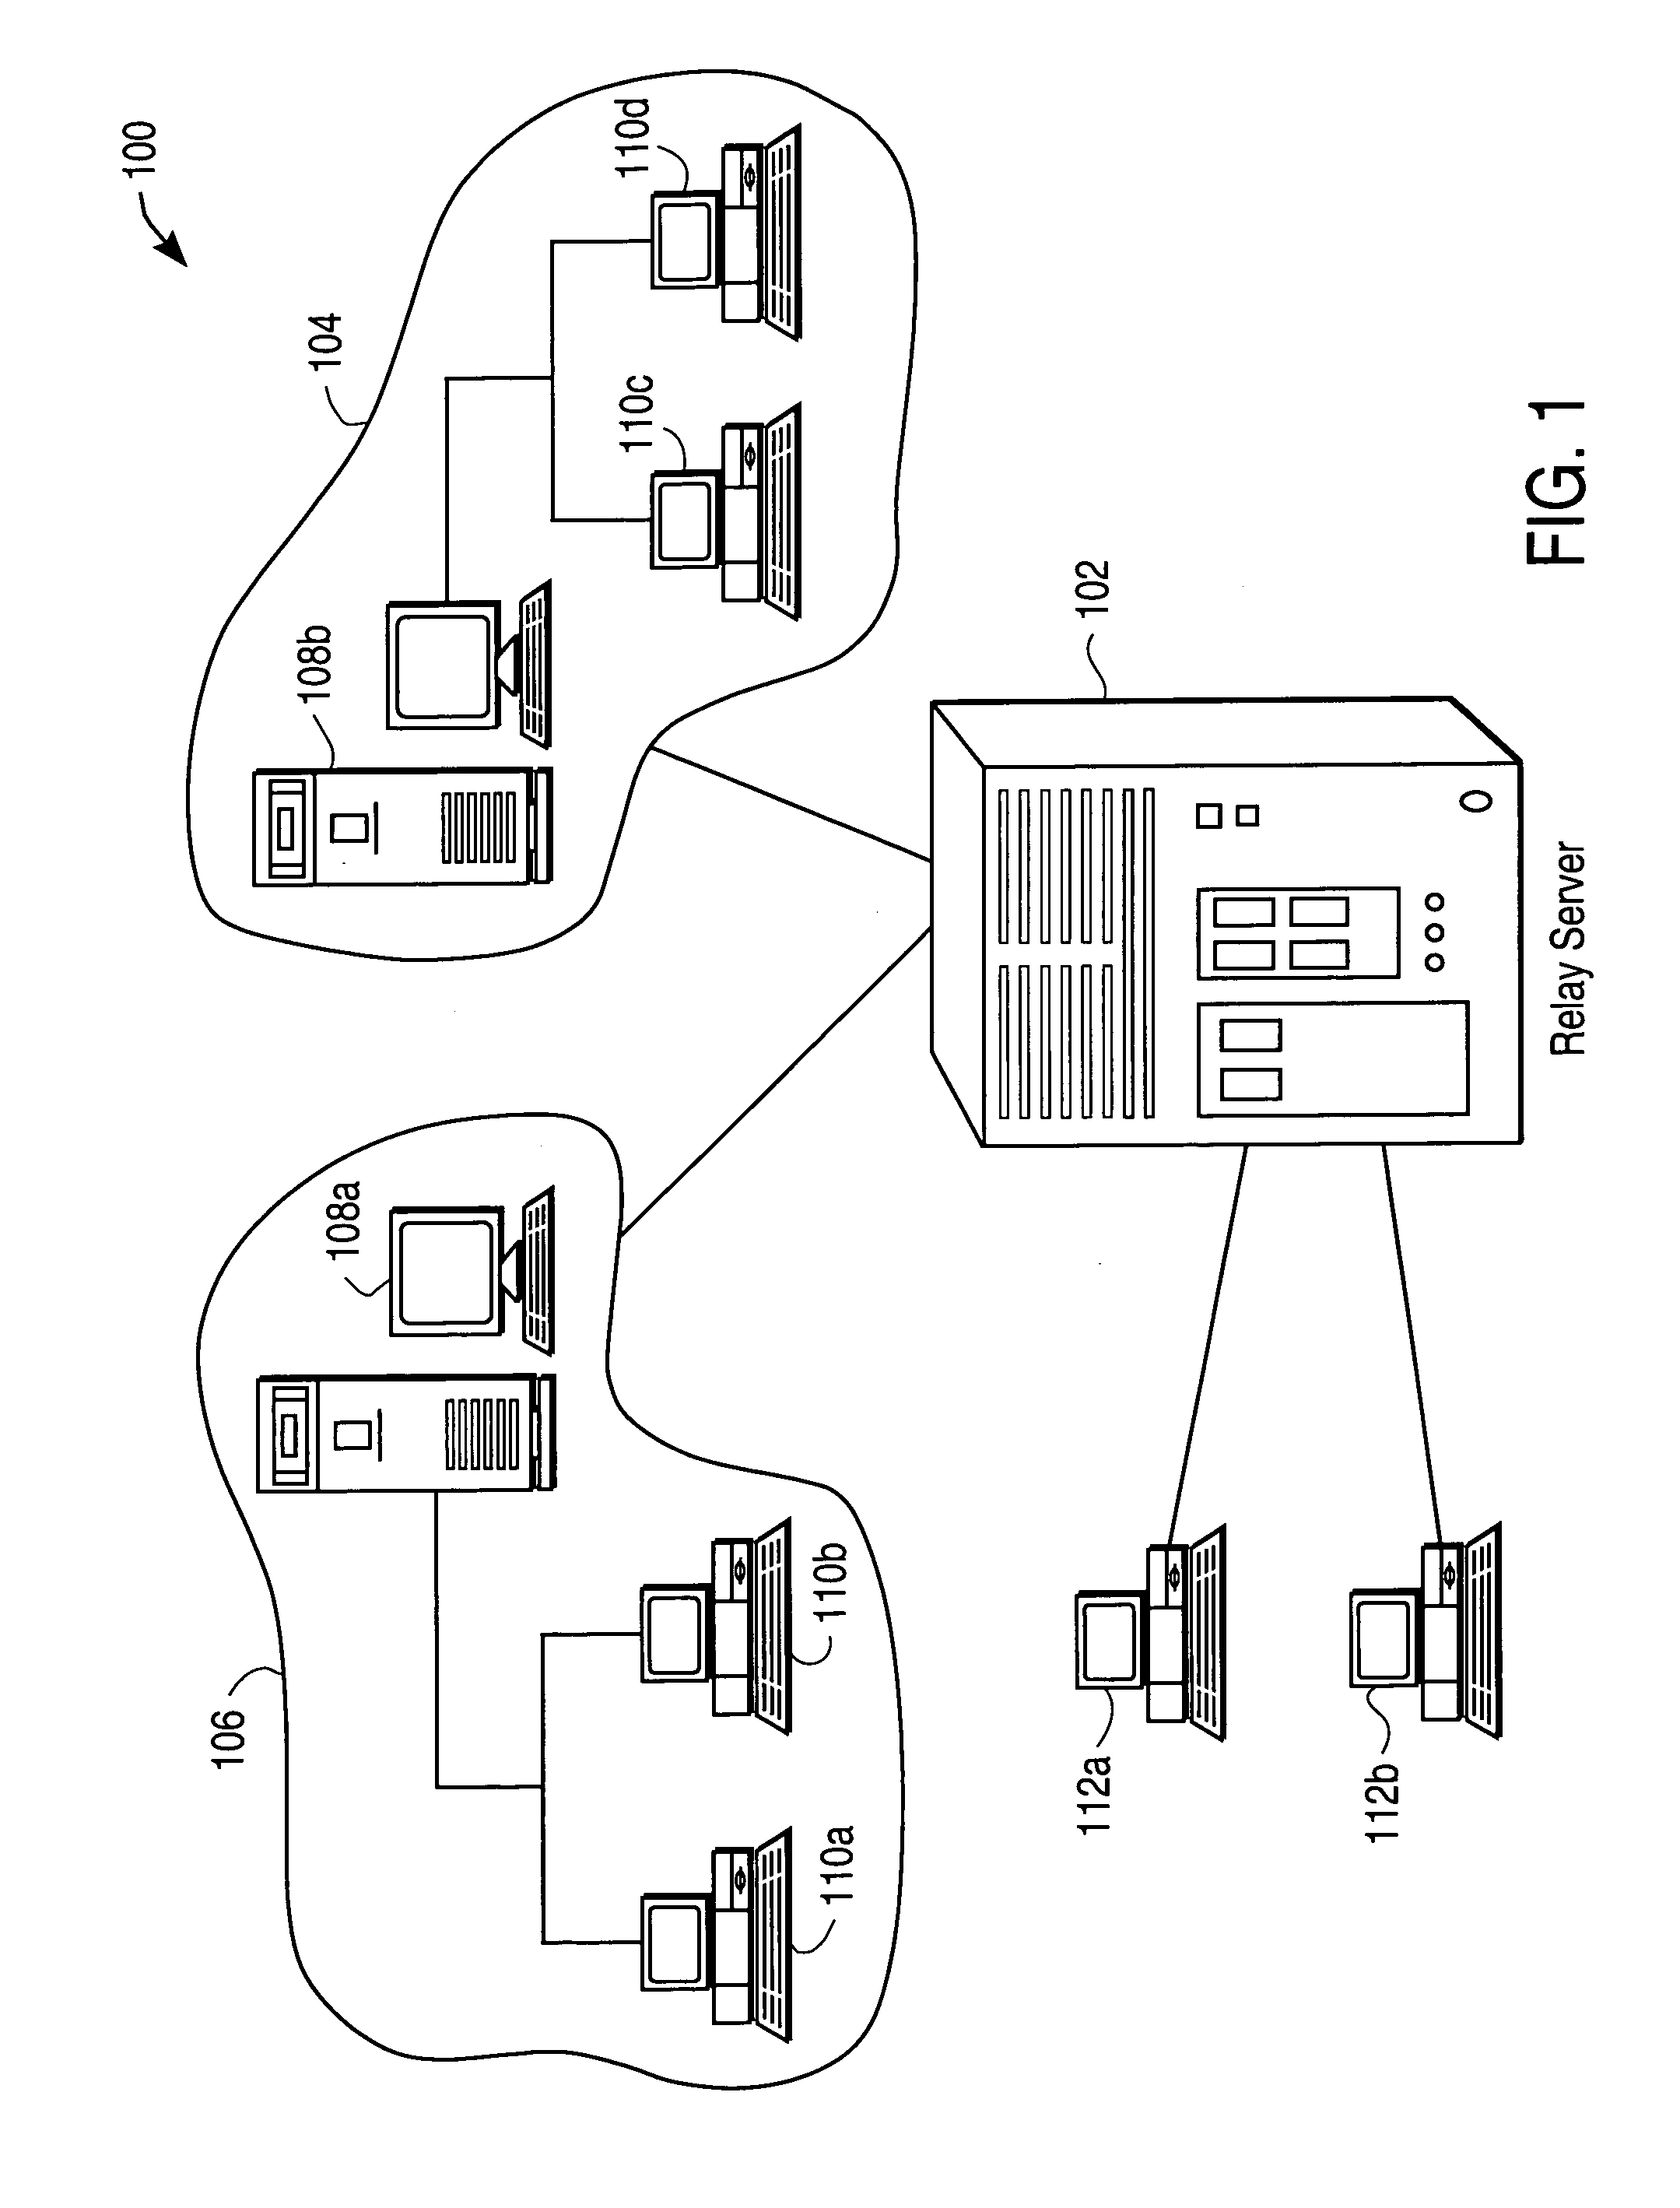 System and method for e-mail alias registration